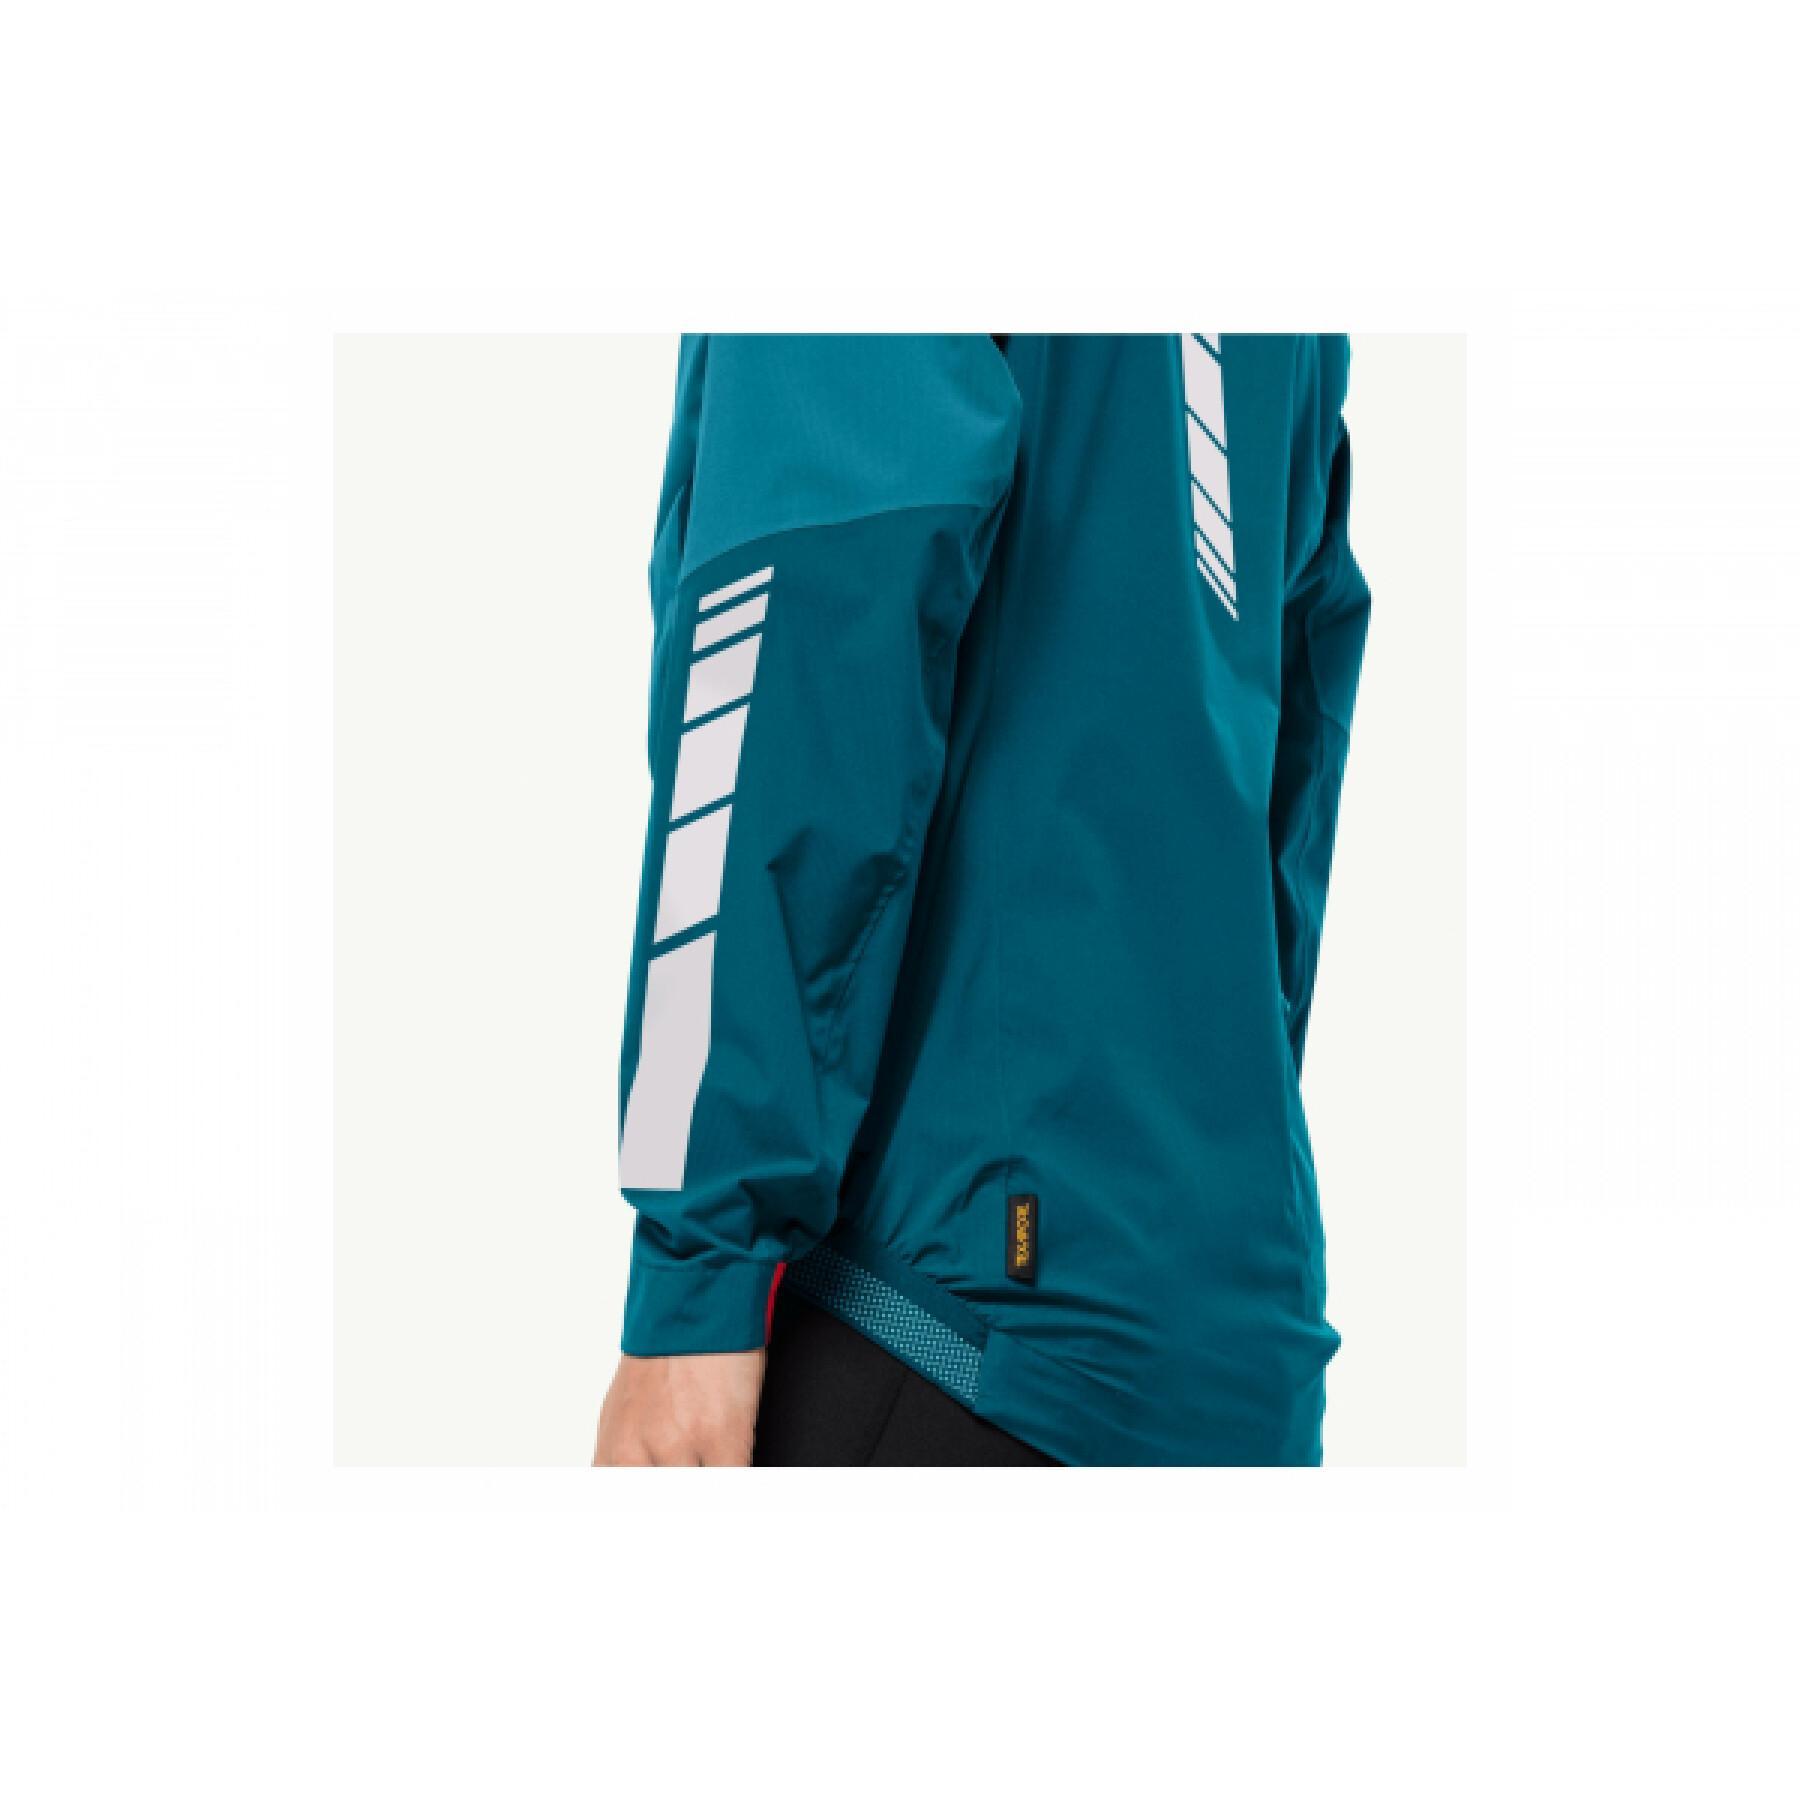 Chaqueta impermeable para mujer Jack Wolfskin Morobbia 2.5L